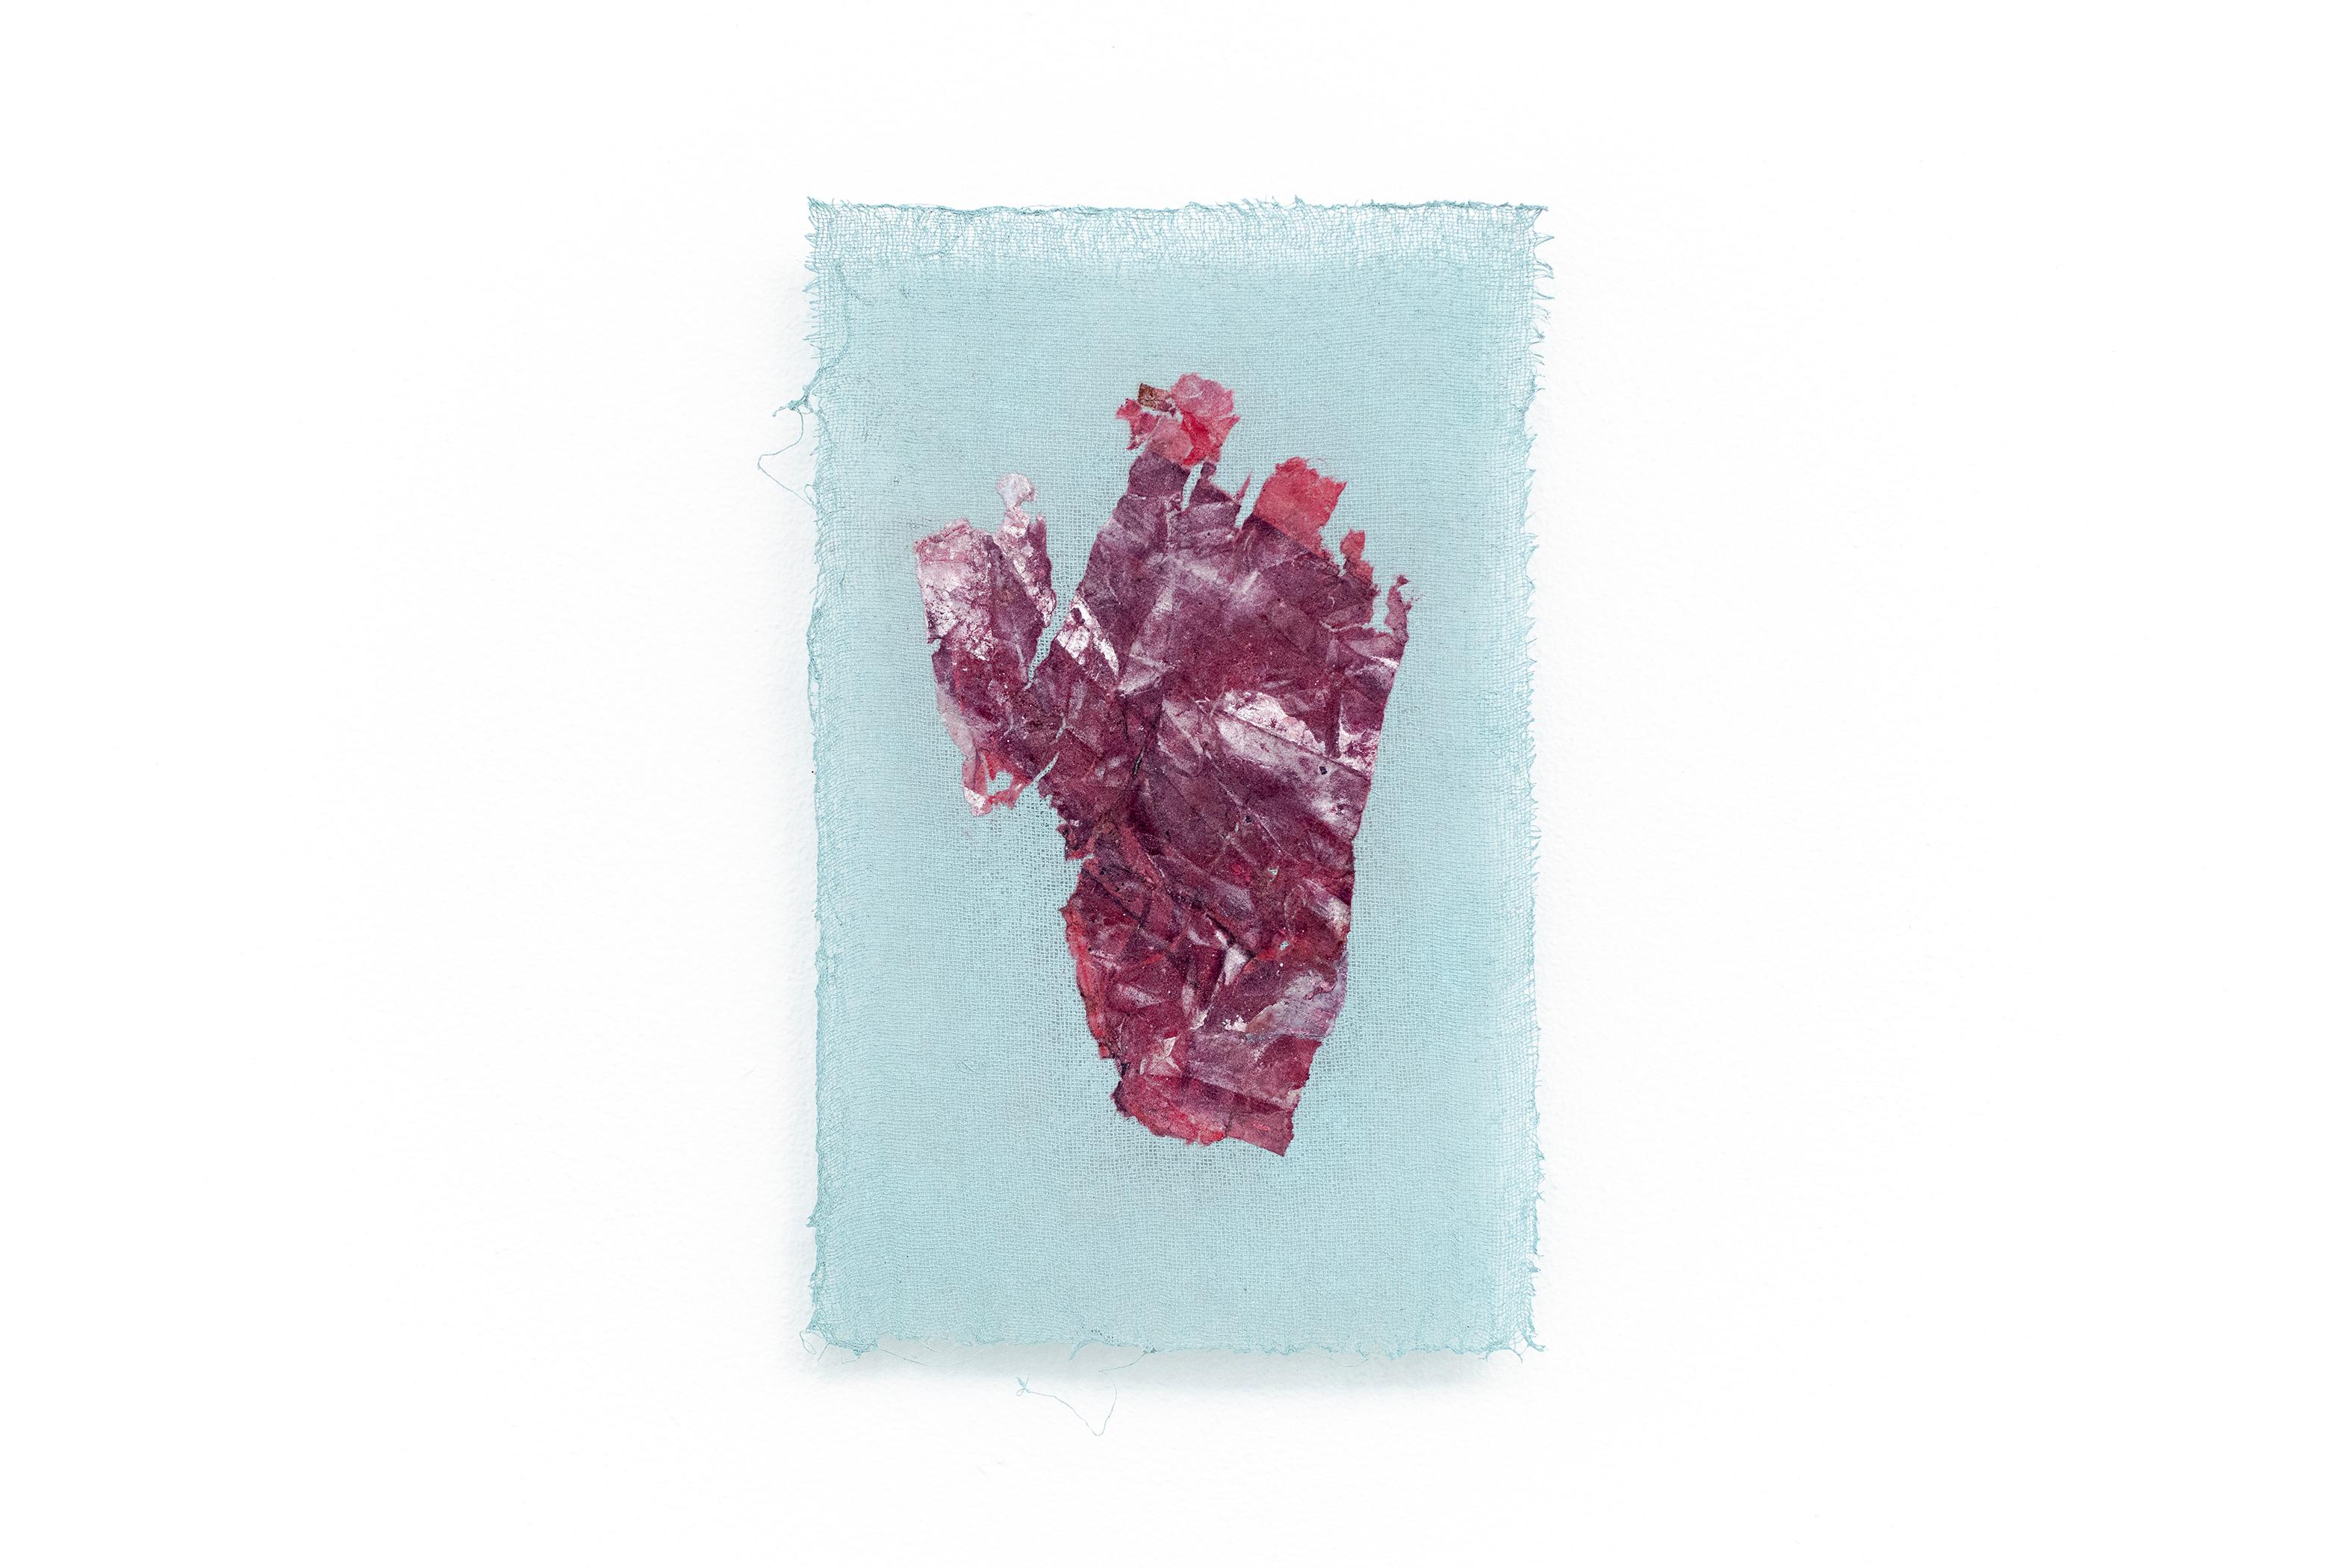 Heart, Mulberry paper and acrylic on gauze